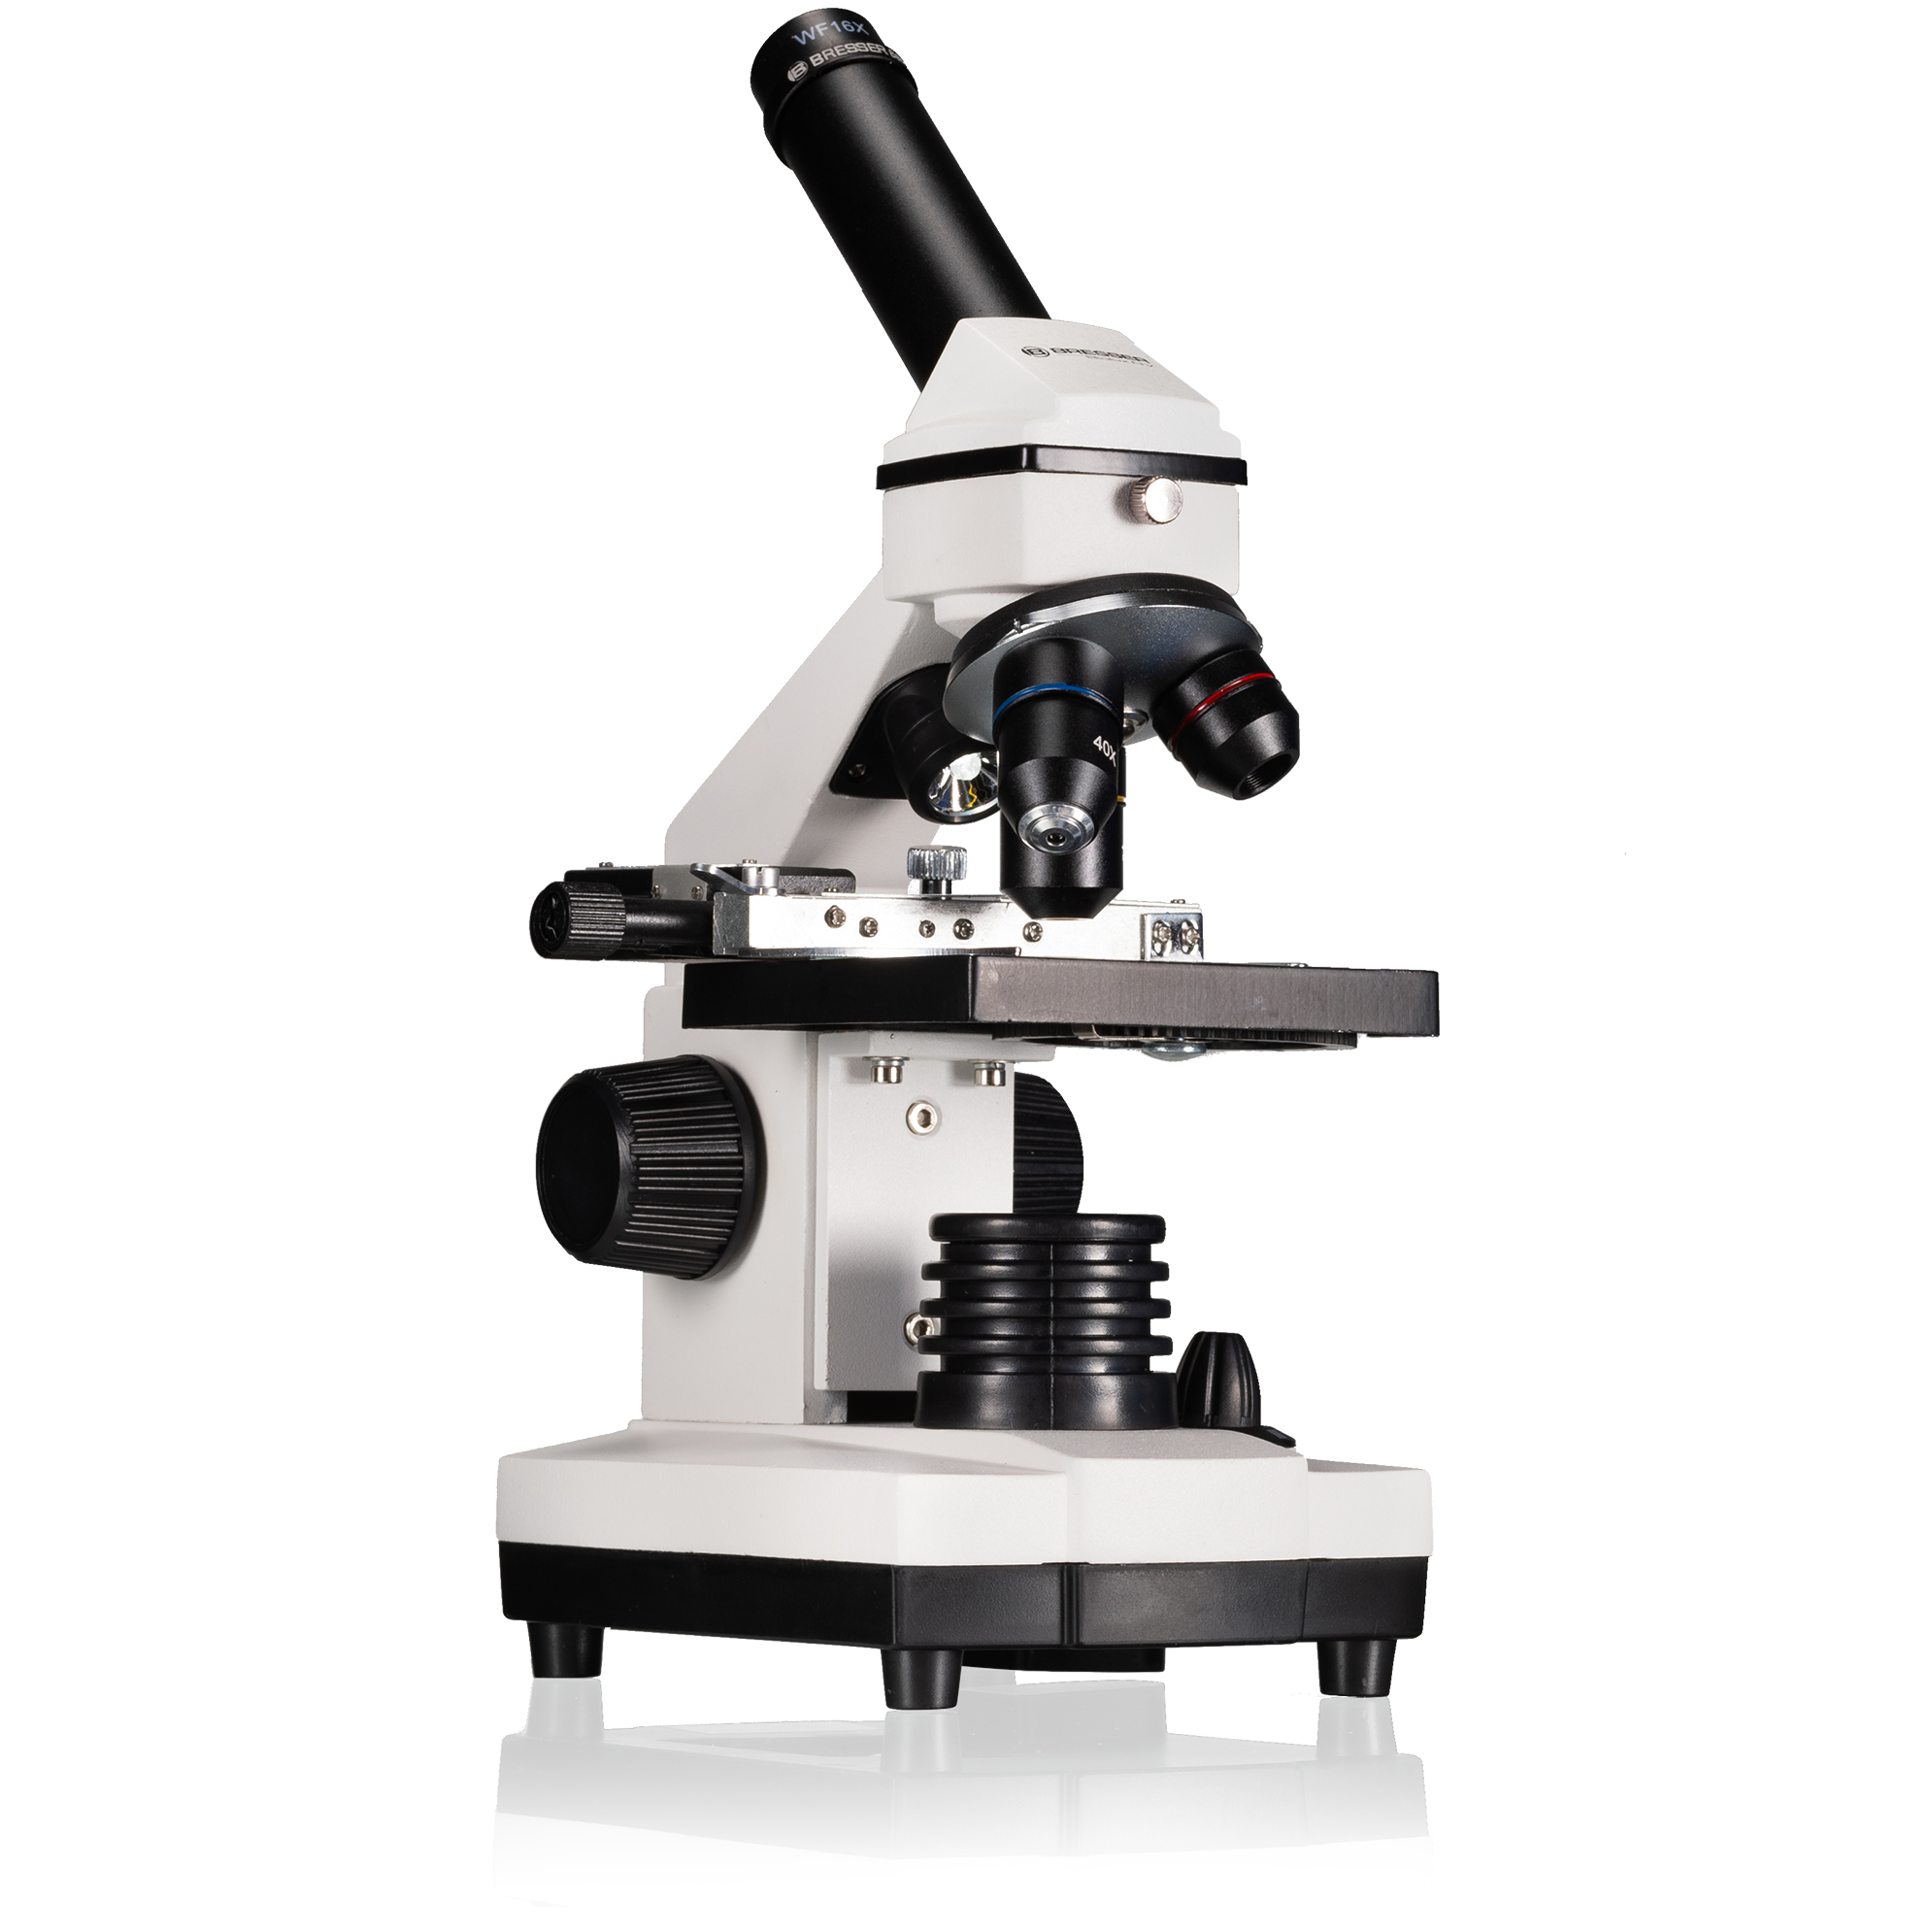 Microscope Your Camera | Biolux NV with BRESSER Bresser HD Horizon USB | Expand 20x-1280x